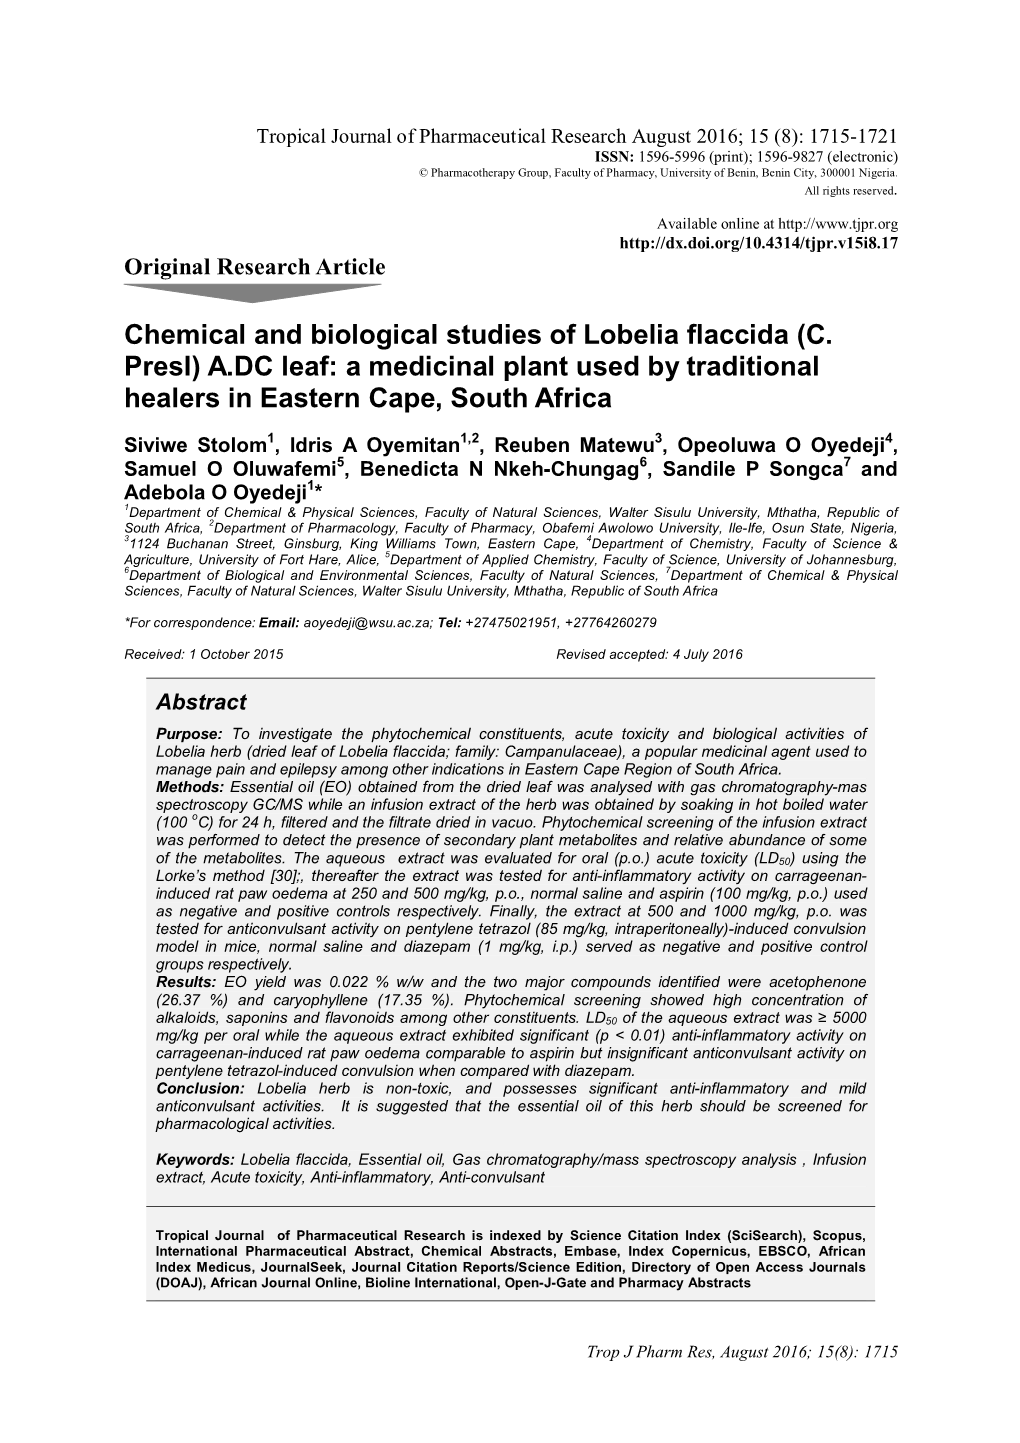 Chemical and Biological Studies of Lobelia Flaccida (C. Presl) A.DC Leaf: a Medicinal Plant Used by Traditional Healers in Eastern Cape, South Africa